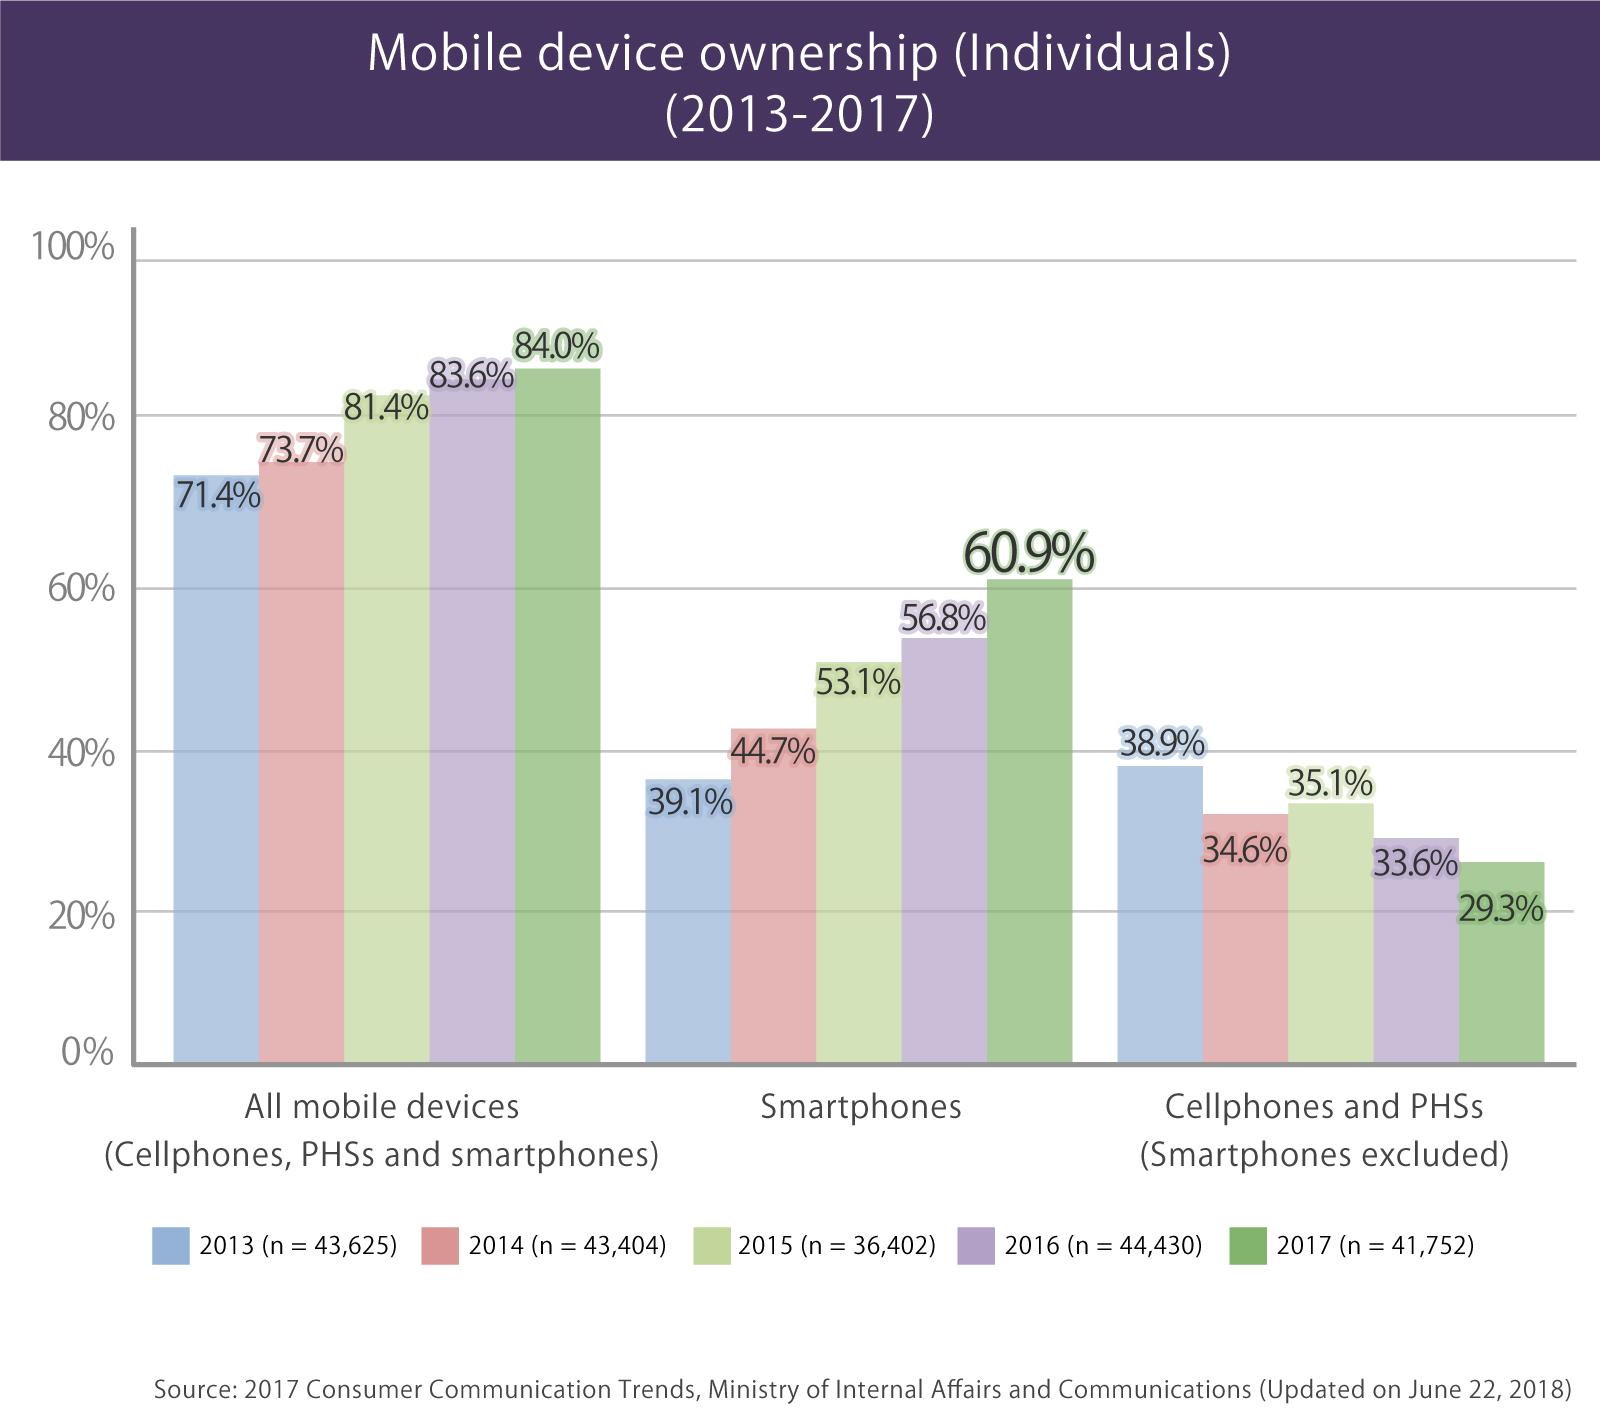 image: Mobile device ownership (Individuals) (2013-2017) in Japan